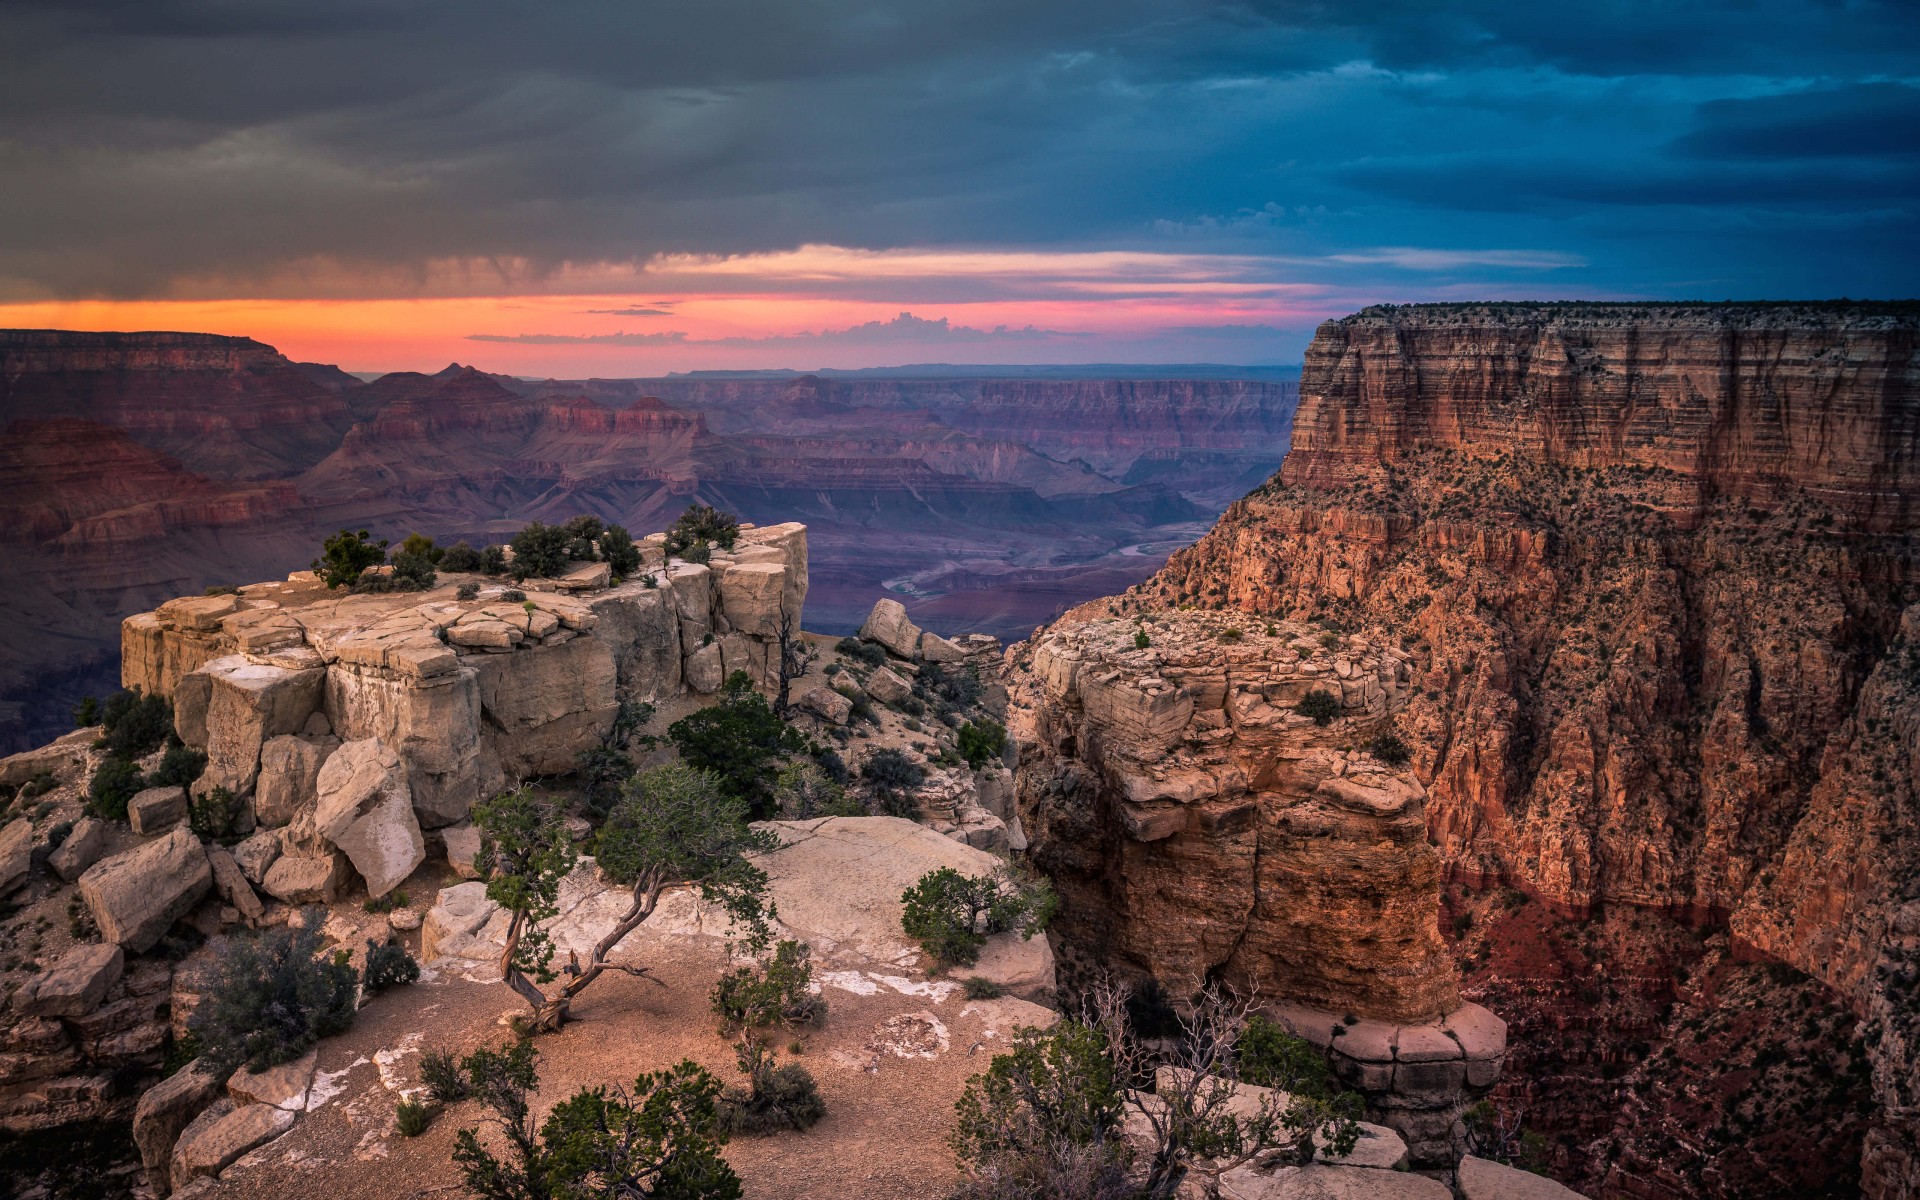 sunset-at-the-grand-canyon-wallpaper-for-1920x1200-71-770.jpg